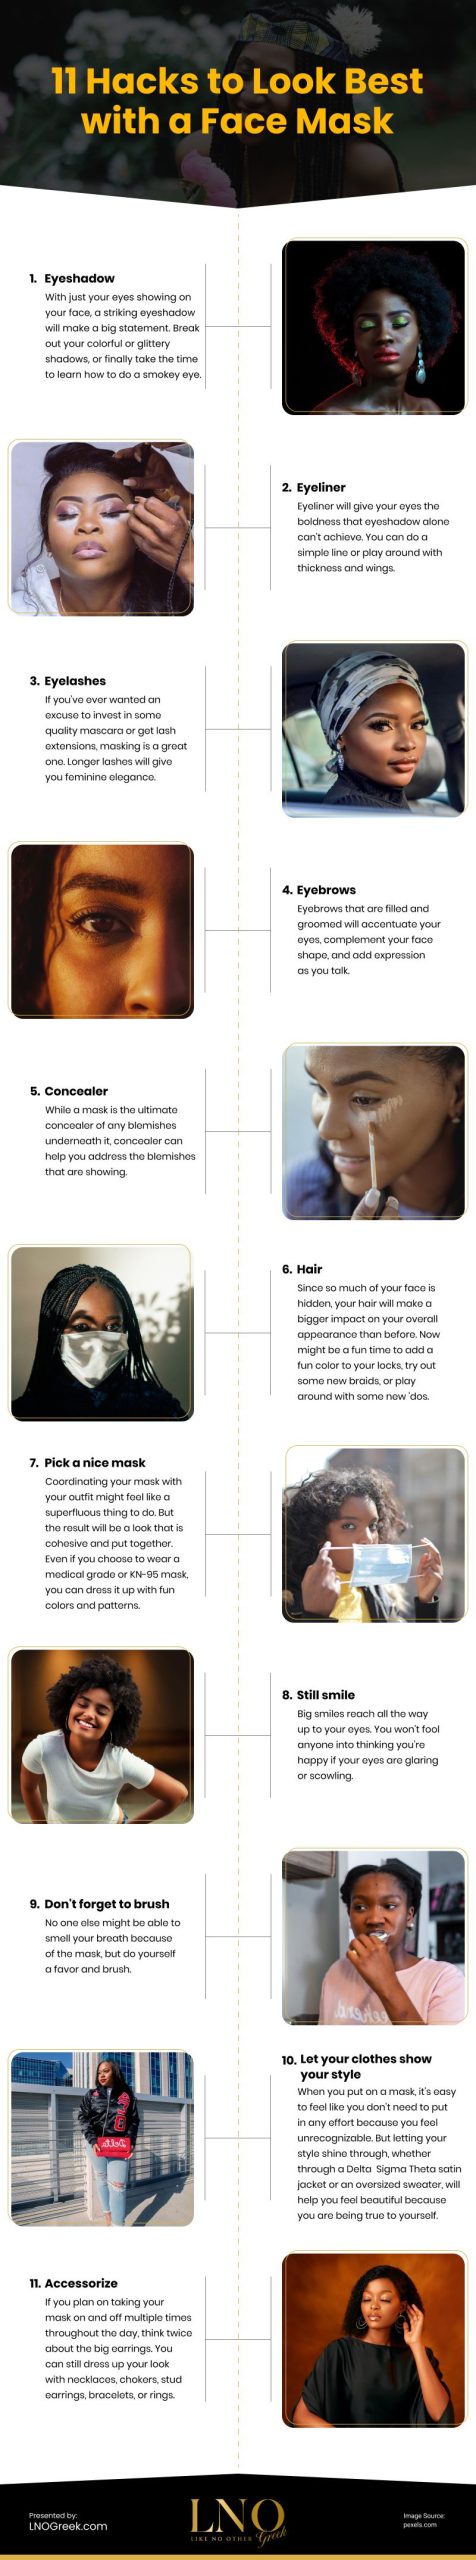 11 Hacks to Look Best with a Face Mask Infographic